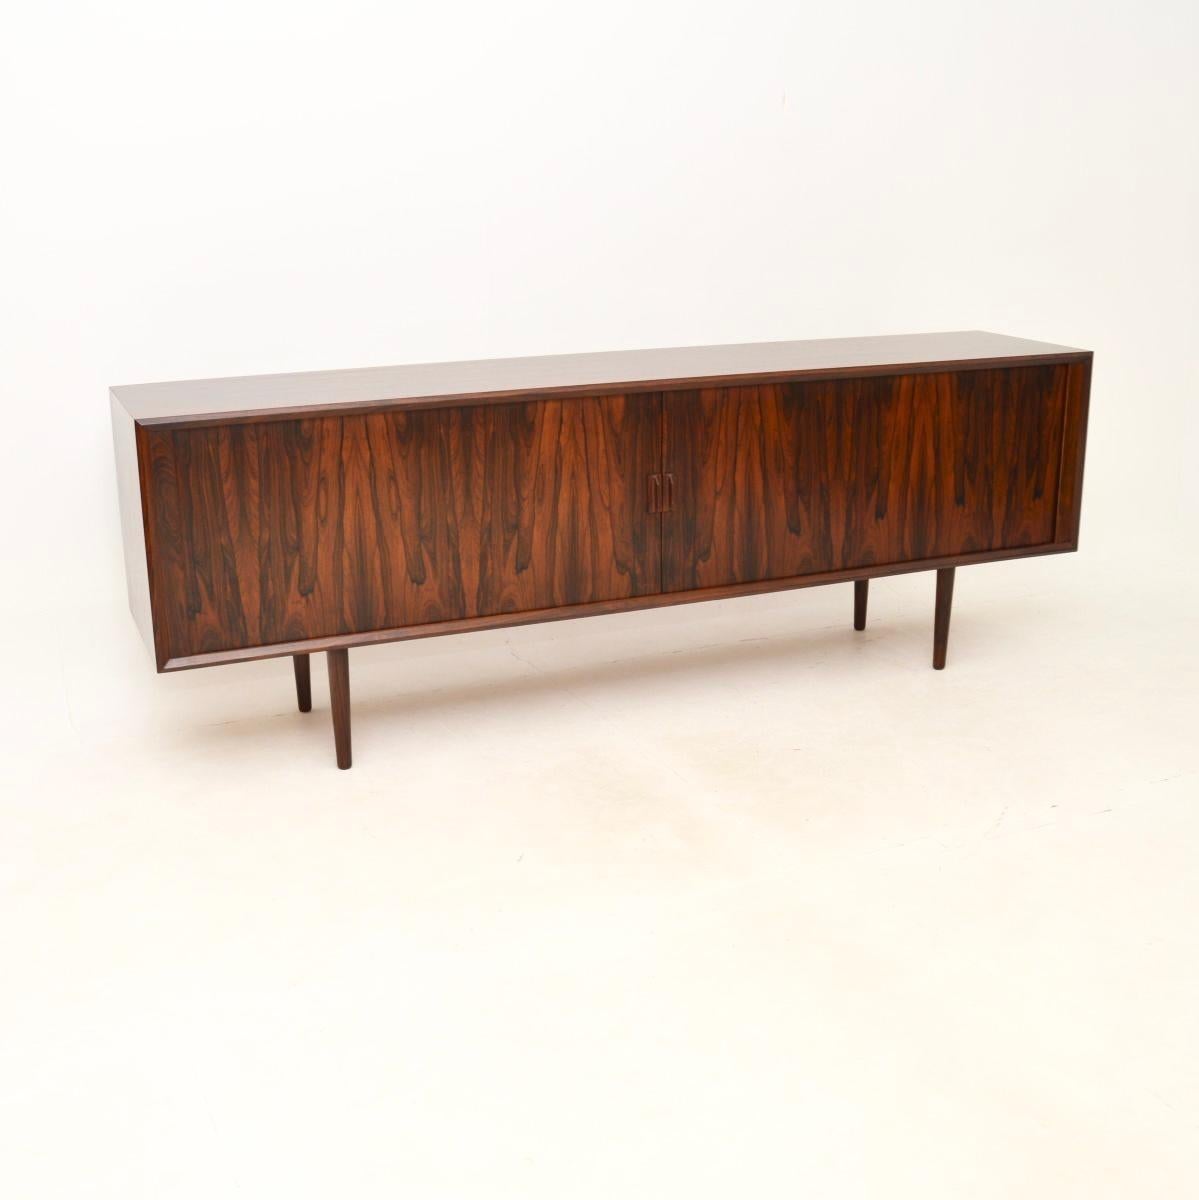 A stunning and extremely well made Danish vintage sideboard by IB Kofod Larsen. It was made in Denmark by Faarup, it dates from the 1960’s.

This is of outstanding quality and has a very stylish design. The tambour doors are beautifully made, they